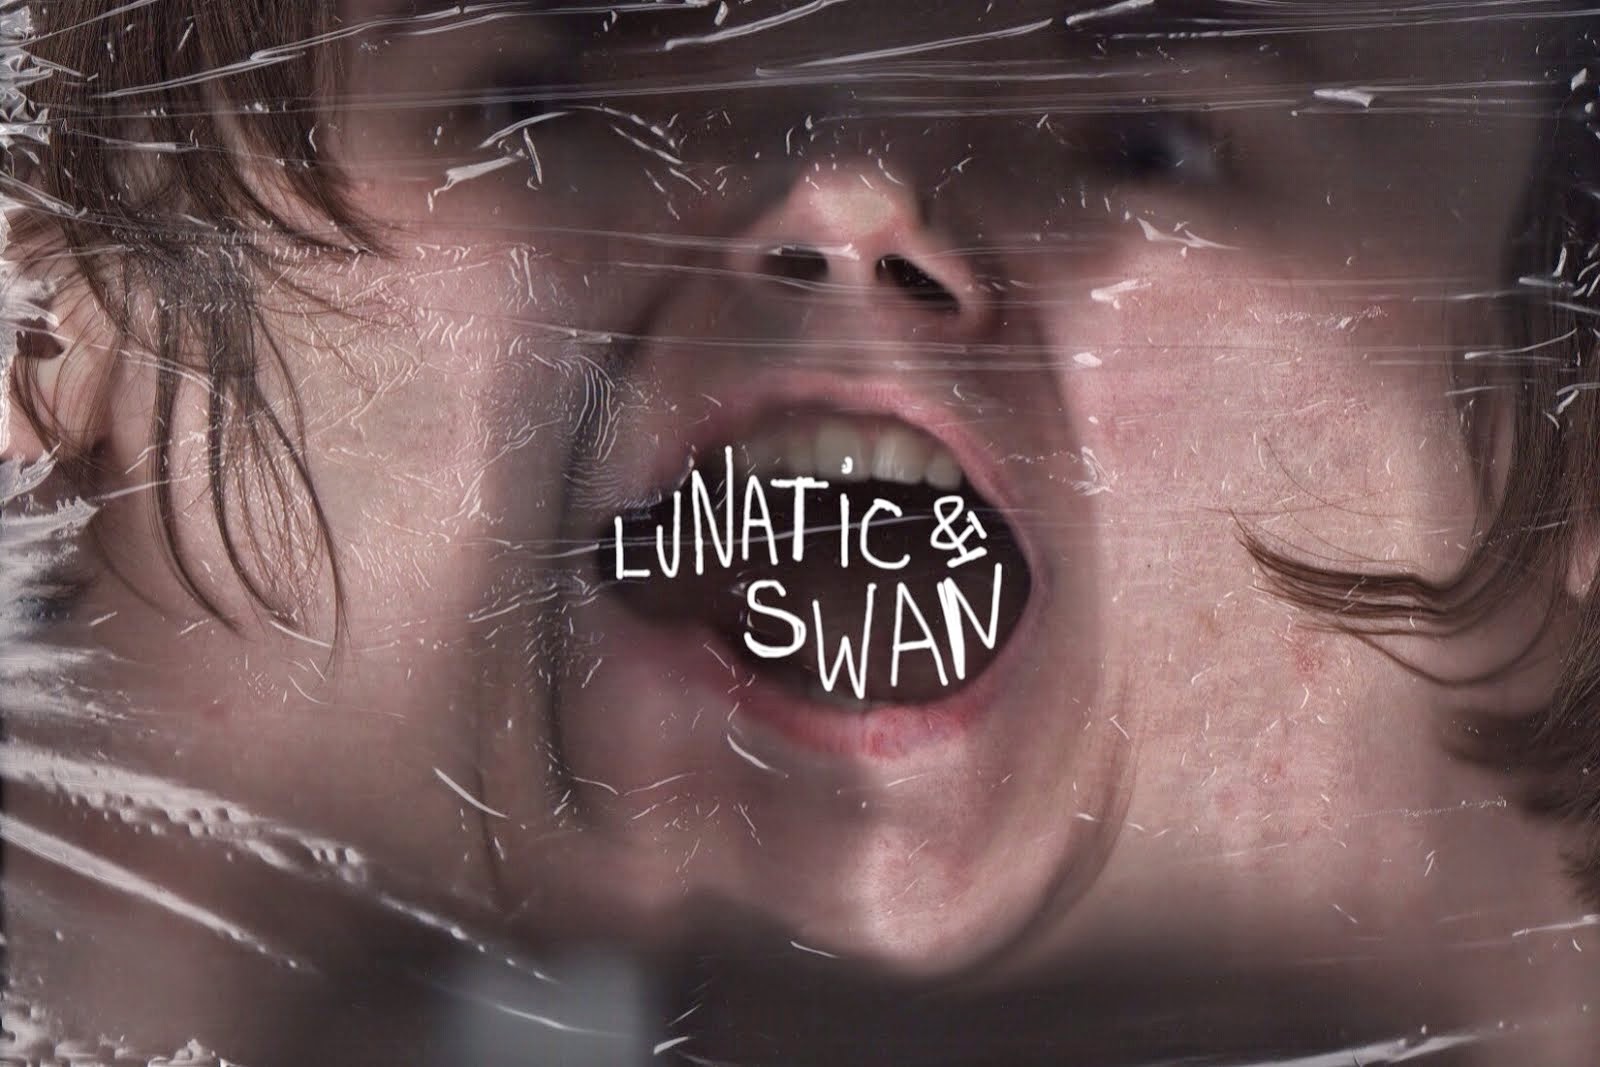 The Lunatic & The Swan